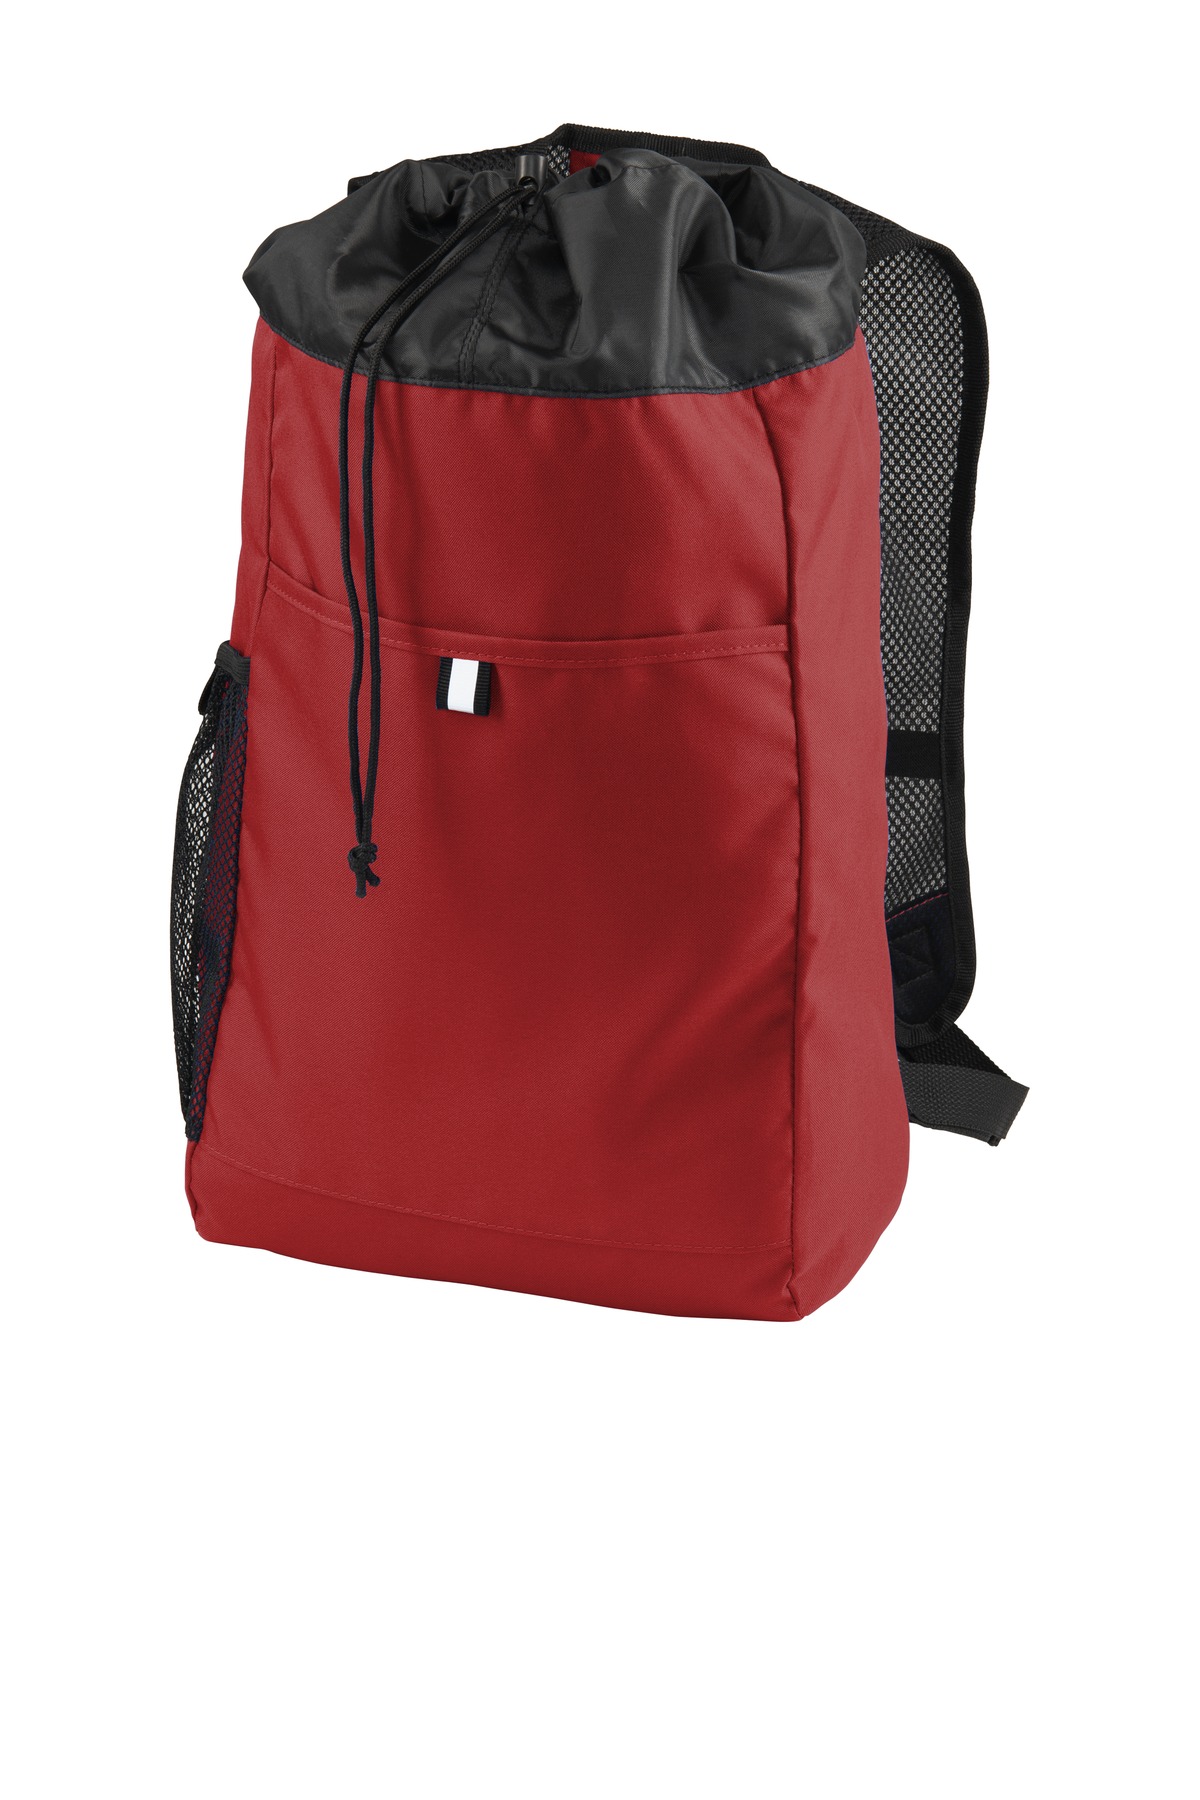 Port Authority Adult Unisex Plain Backpack Chili Red/Blk One Size Fits All - image 1 of 2